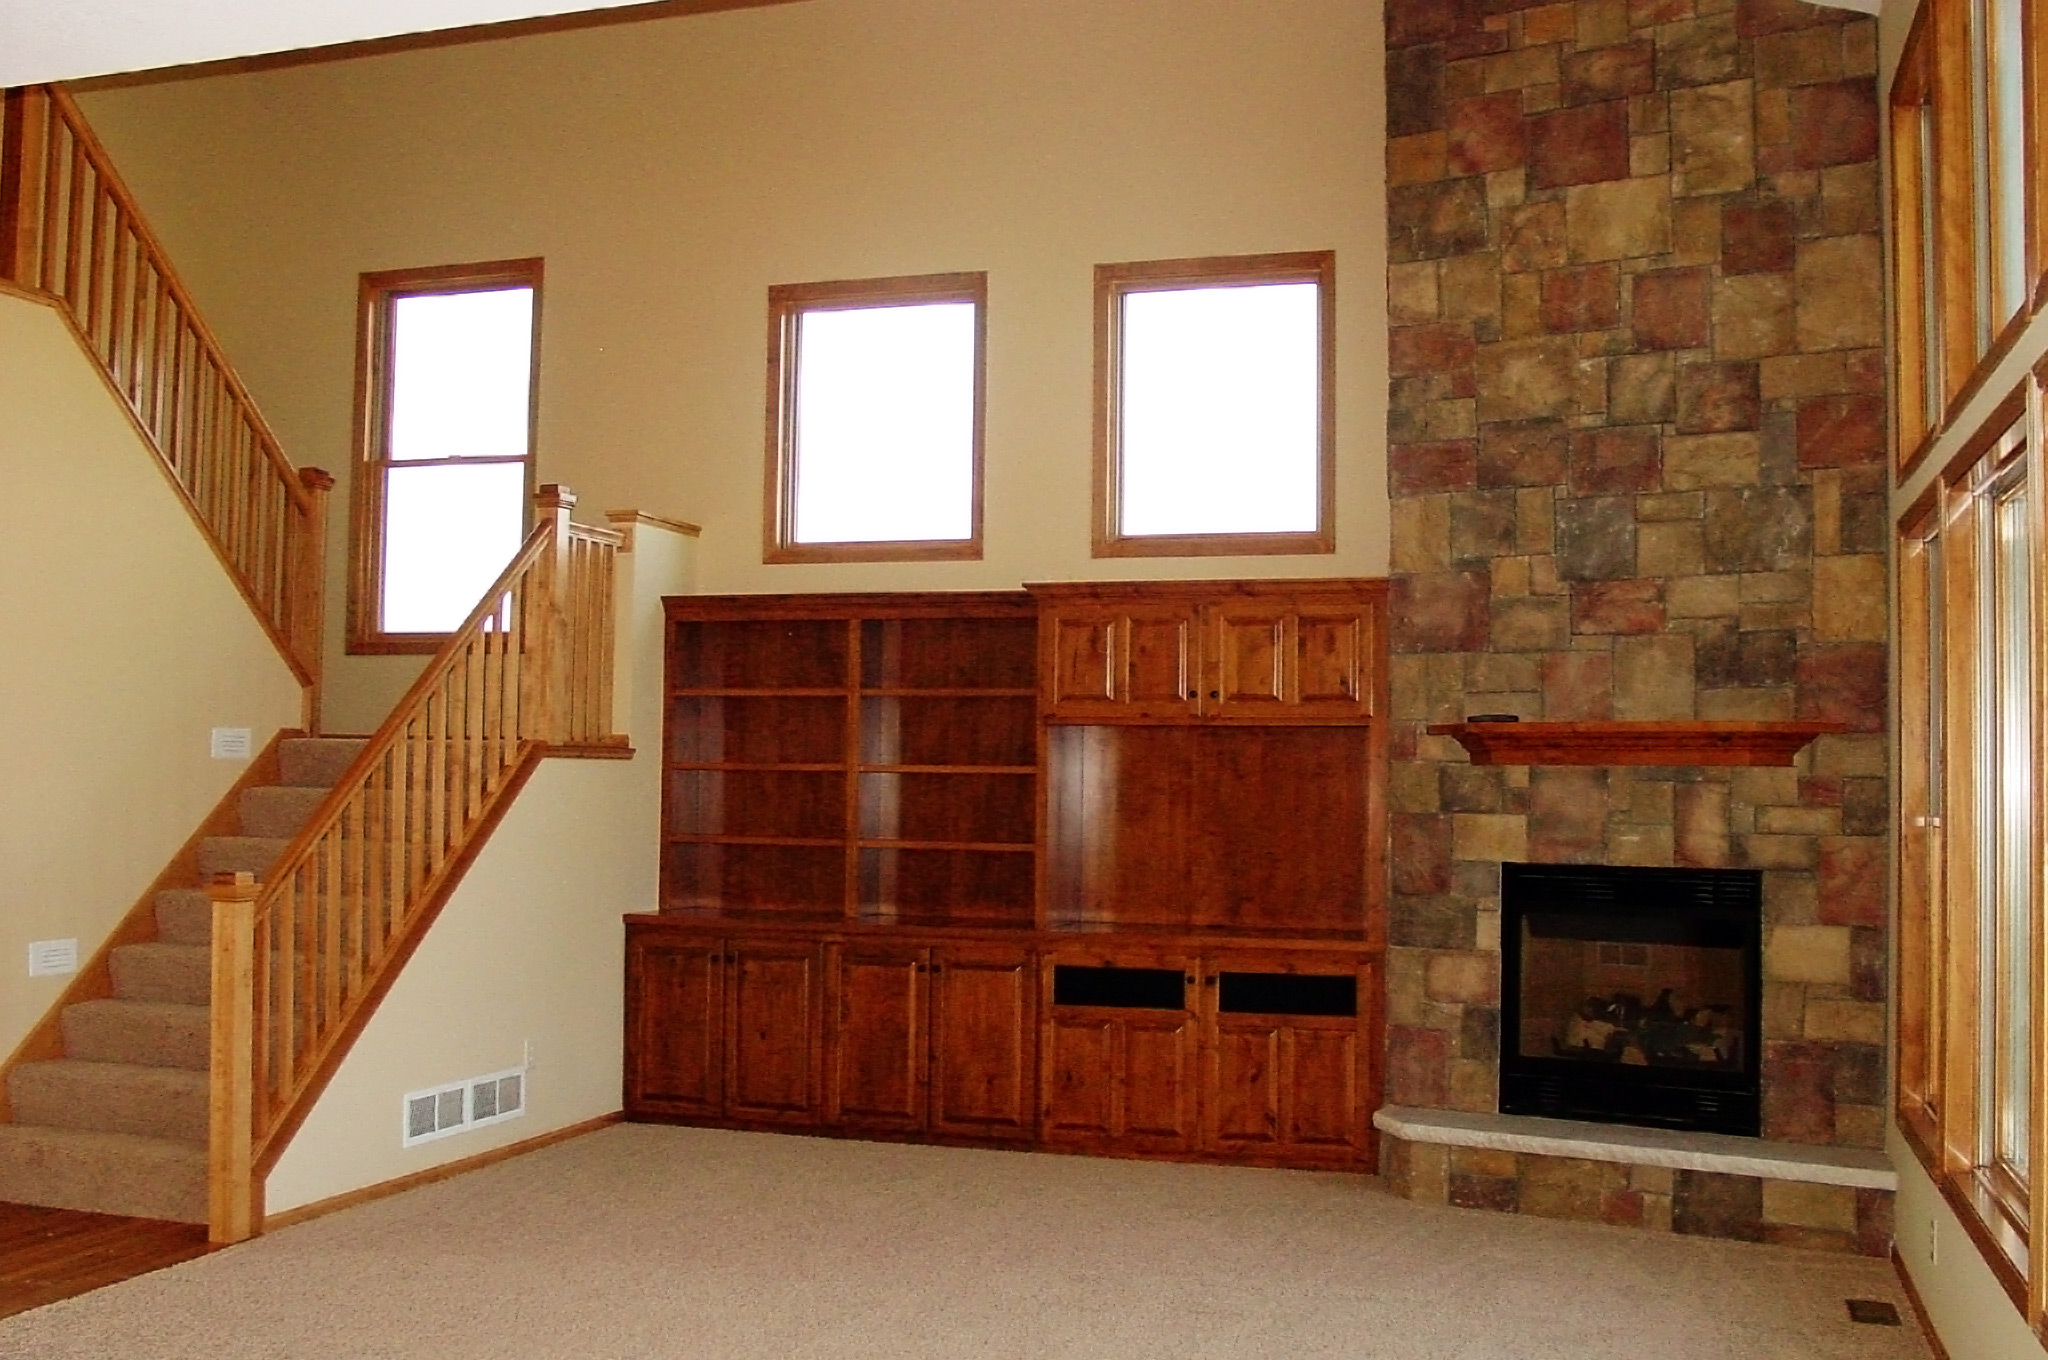 Living room with built-ins and stone fireplace